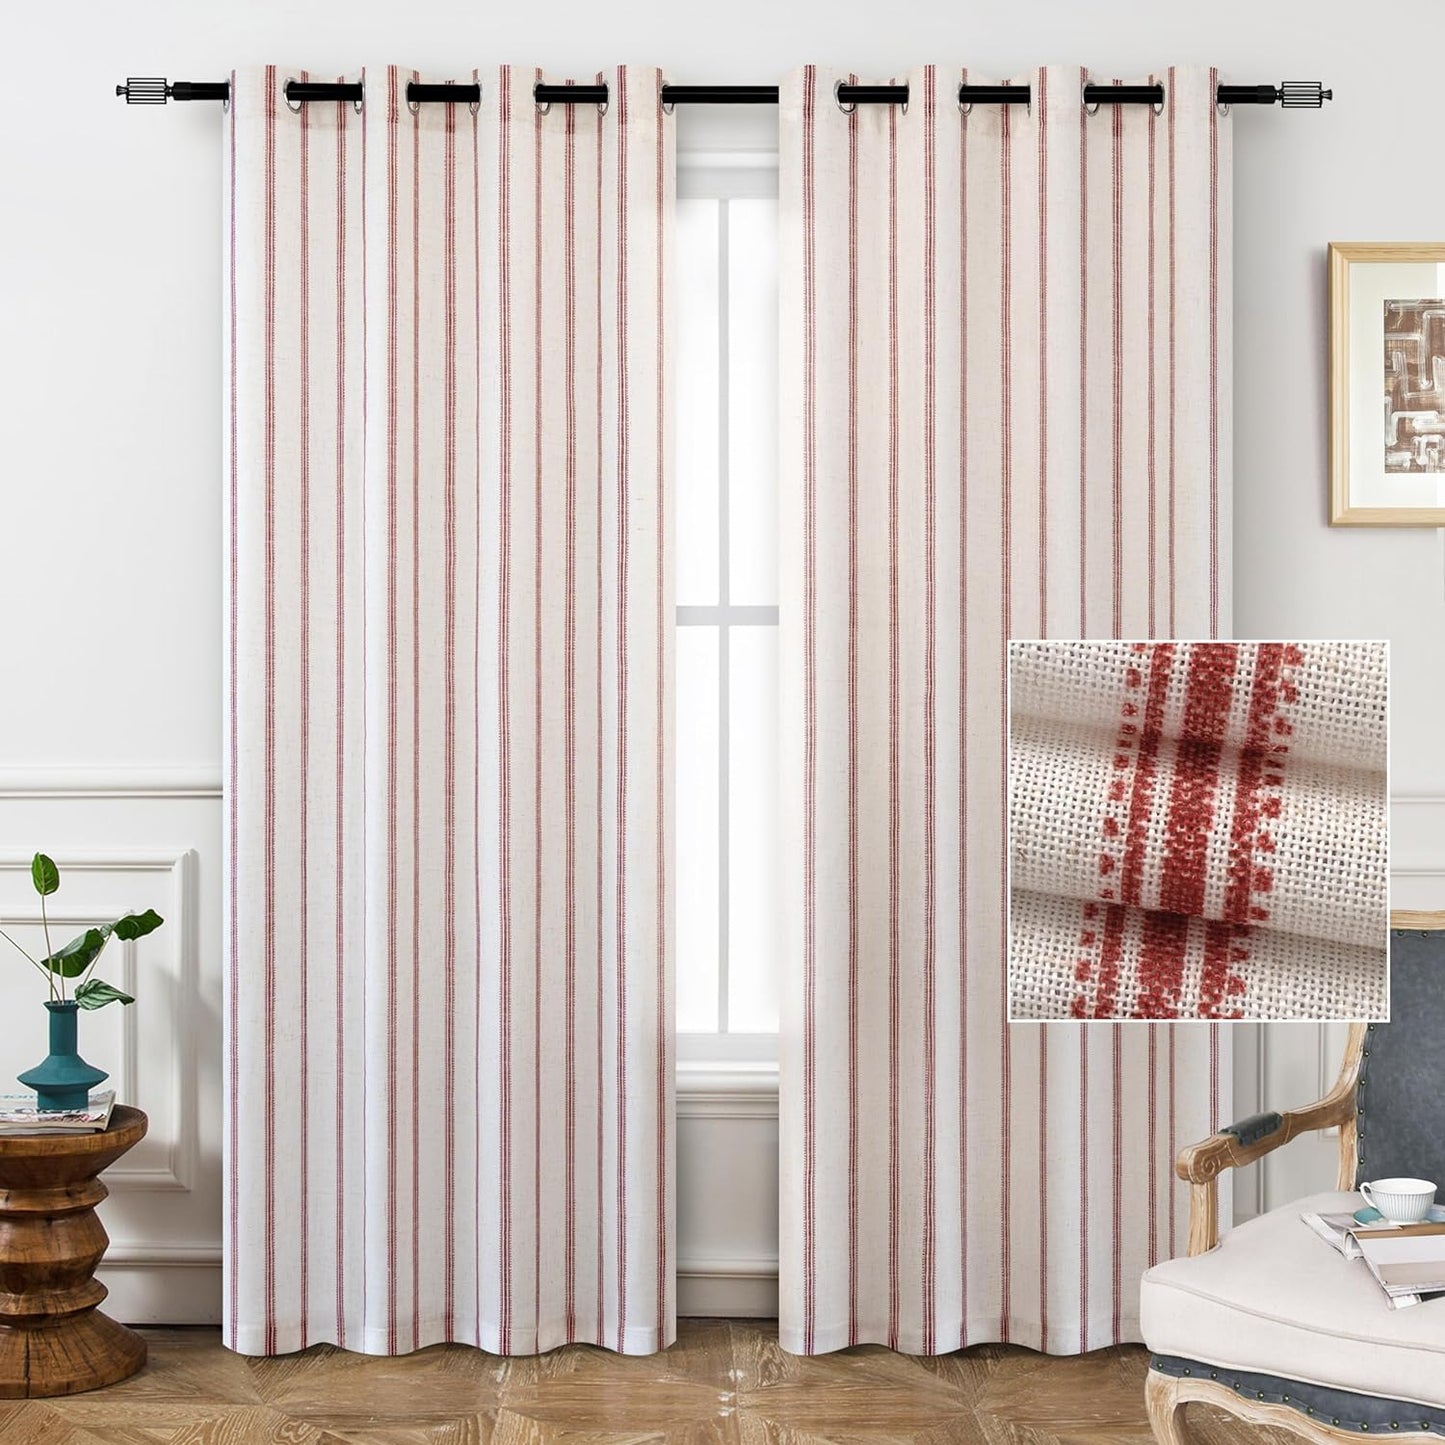 Driftaway Farmhouse Linen Blend Blackout Curtains 84 Inches Long for Bedroom Vertical Striped Printed Linen Curtains Thermal Insulated Grommet Lined Treatments for Living Room 2 Panels W52 X L84 Grey  DriftAway Red 52"X90" 